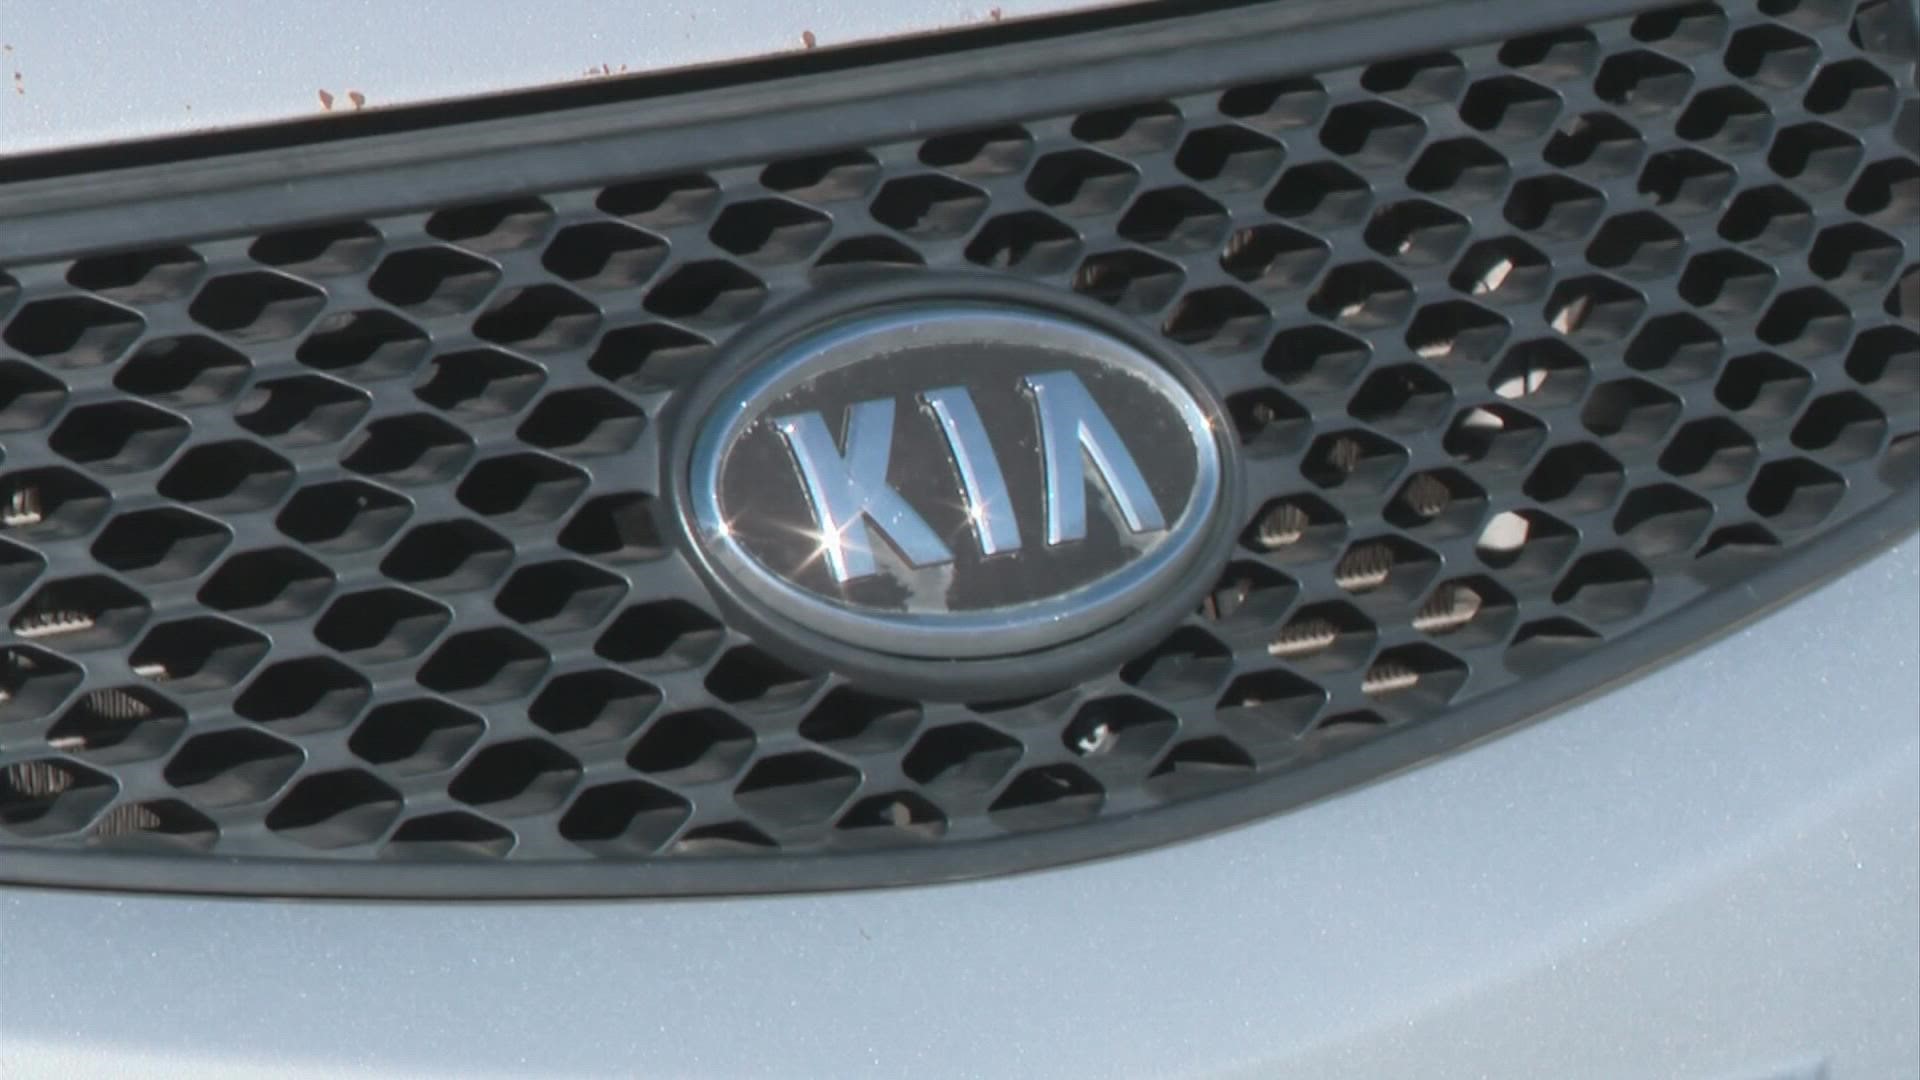 So far this year, Columbus police say there have been 1,606 total reported stolen vehicles, of which 536 have been Hyundai and Kia models.